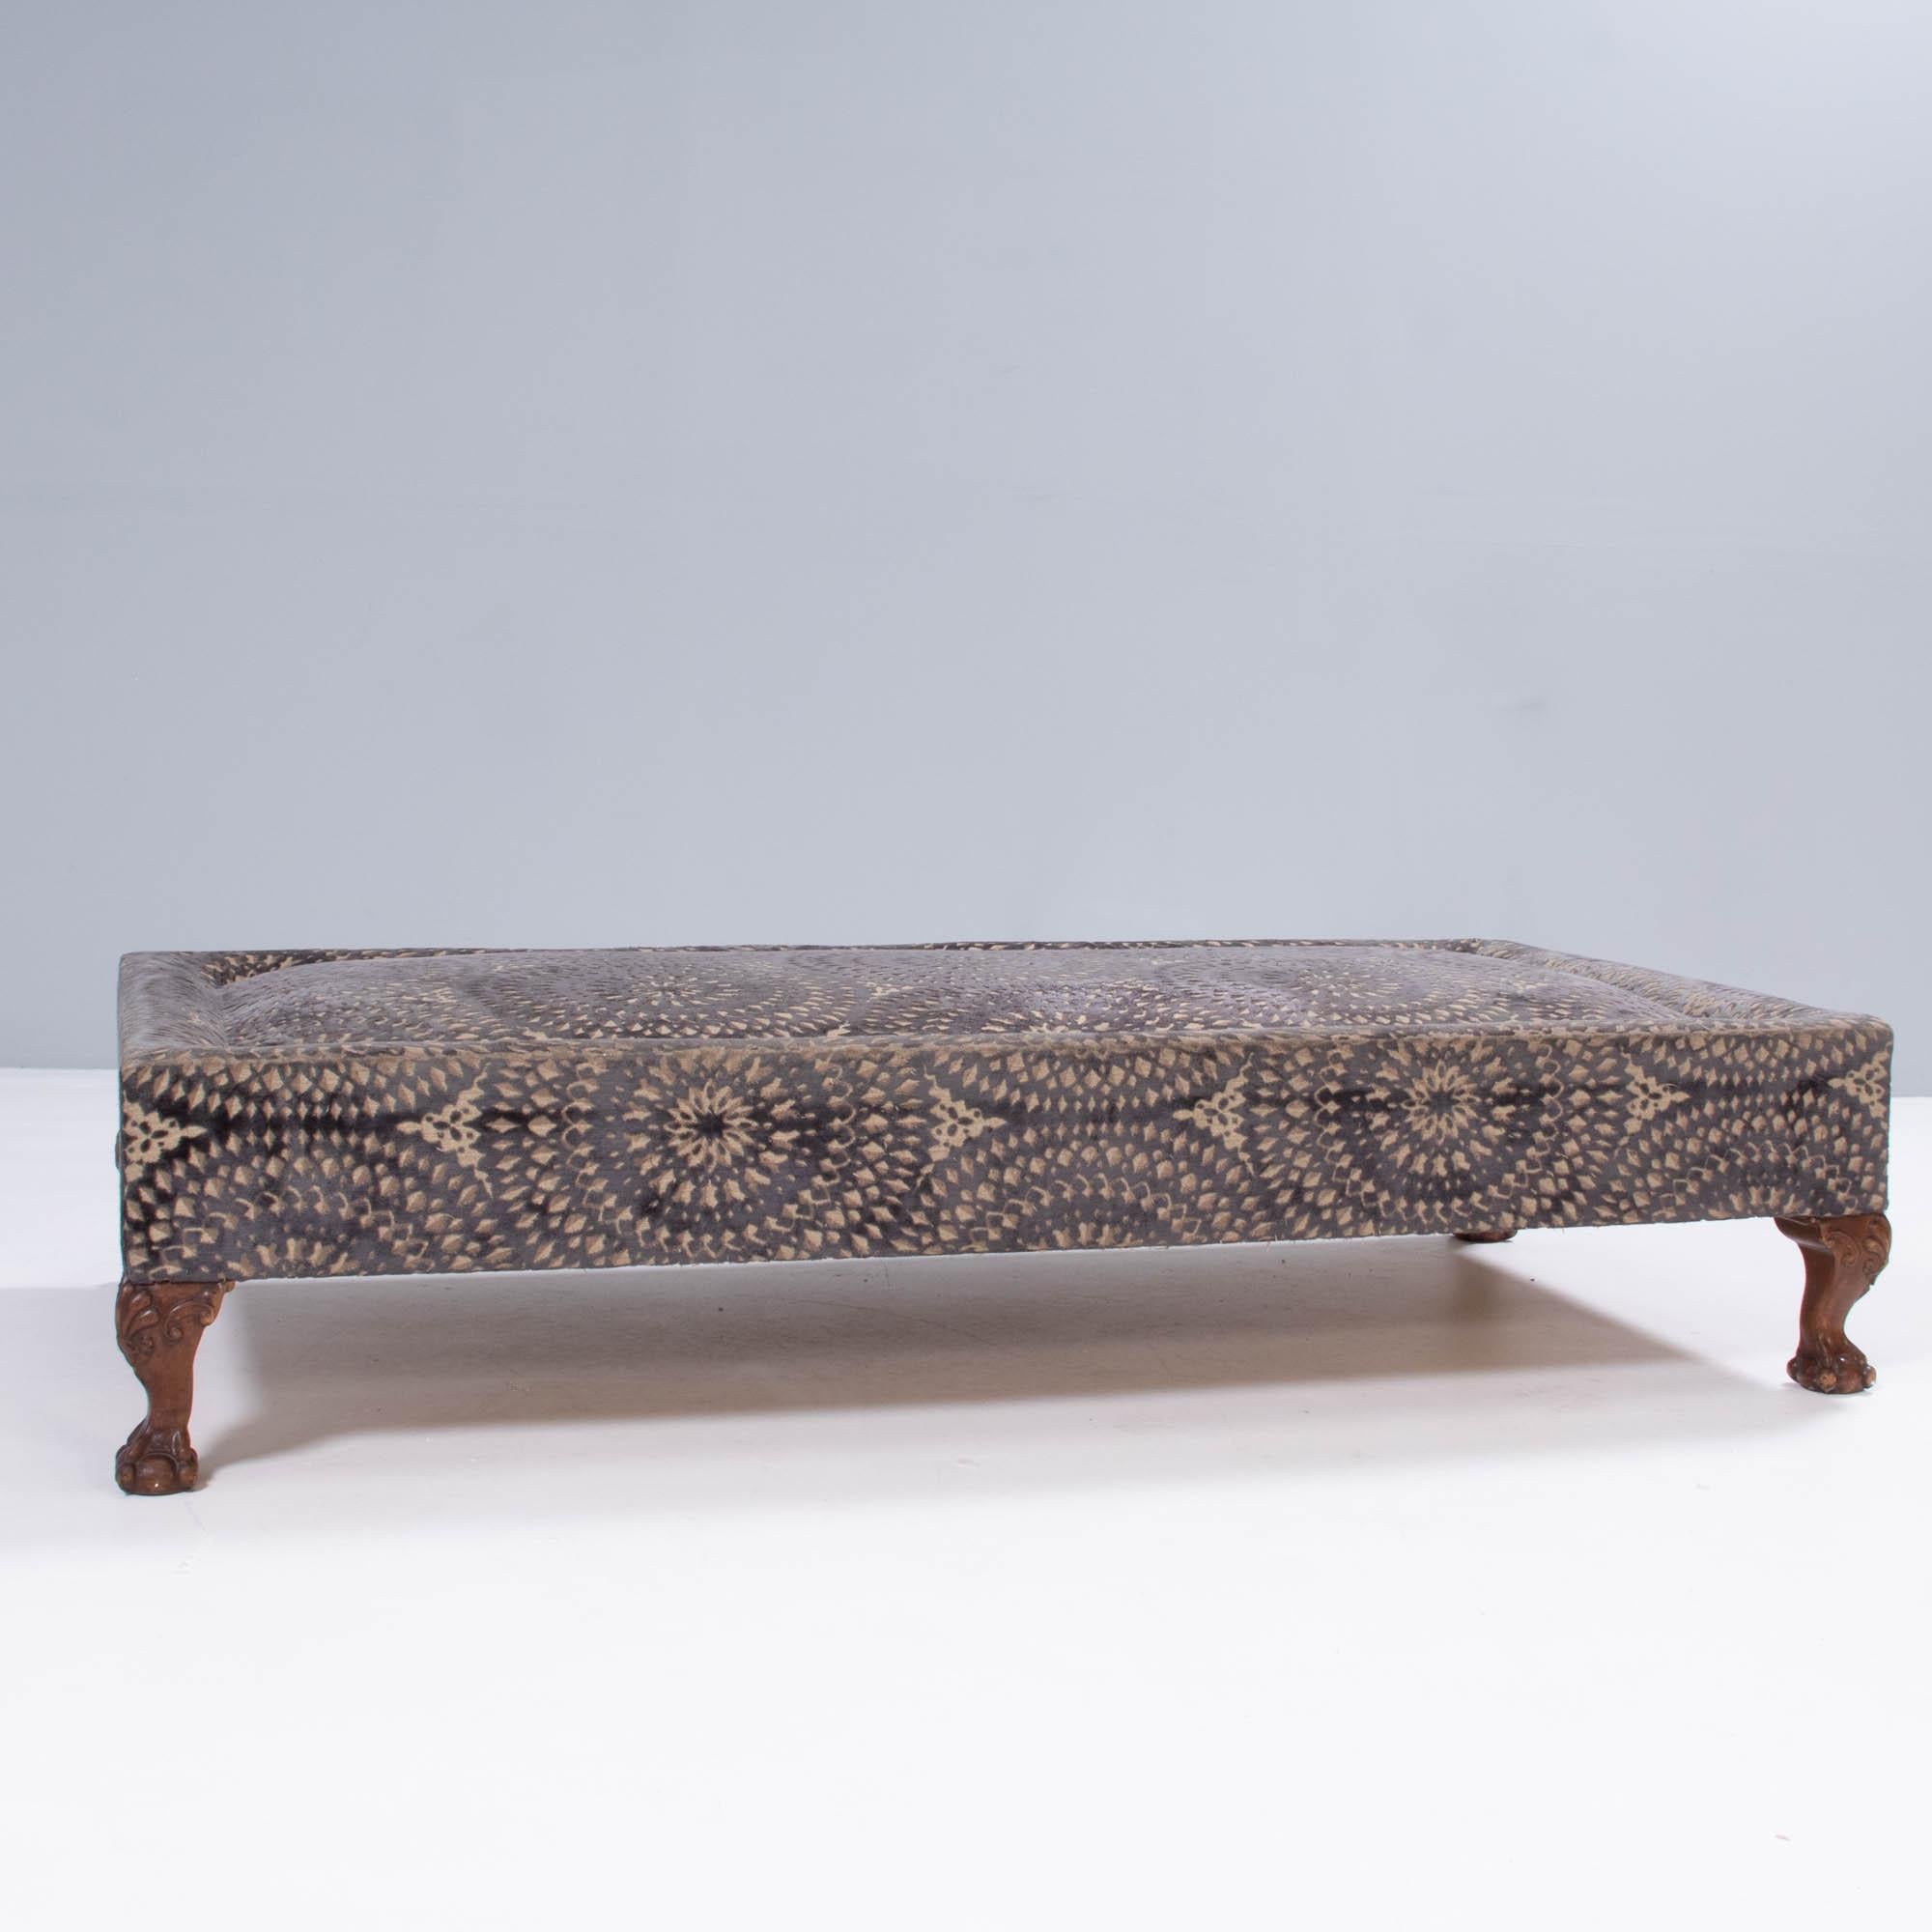 A beautifully made ottoman, fully upholstered in black and beige jacquard velvet, featuring an intricate circle pattern.

The large rectangular ottoman sits on ornately carved wooden legs and features a sloped edge detail.

The generous size